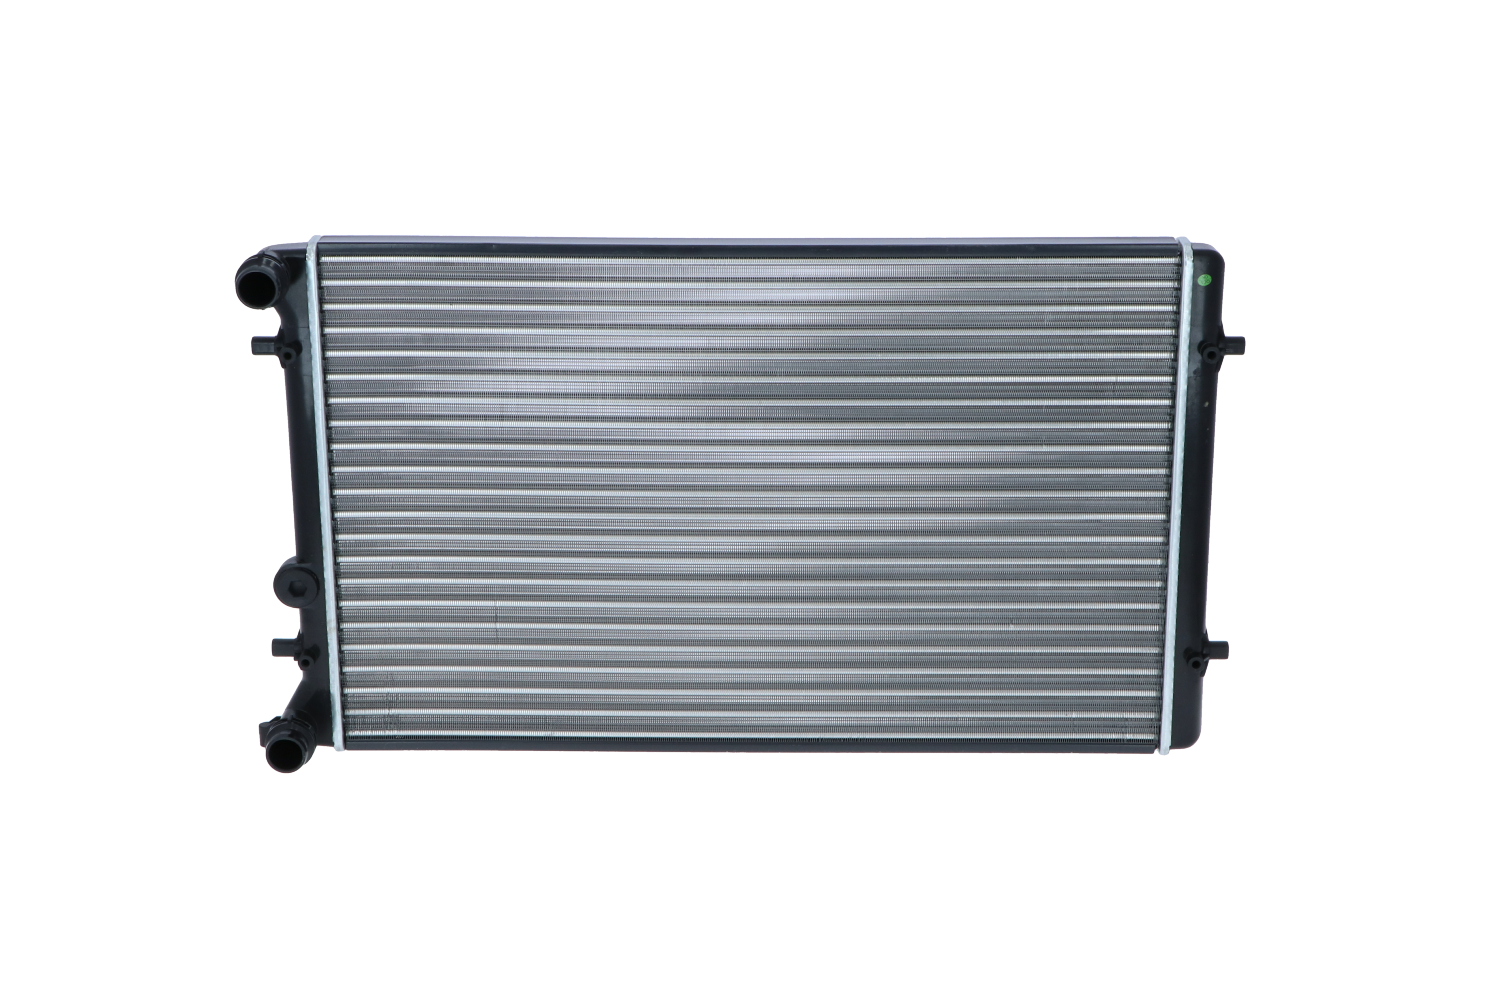 NRF Economy Class 509529A Engine radiator Aluminium, 650 x 414 x 23 mm, Mechanically jointed cooling fins